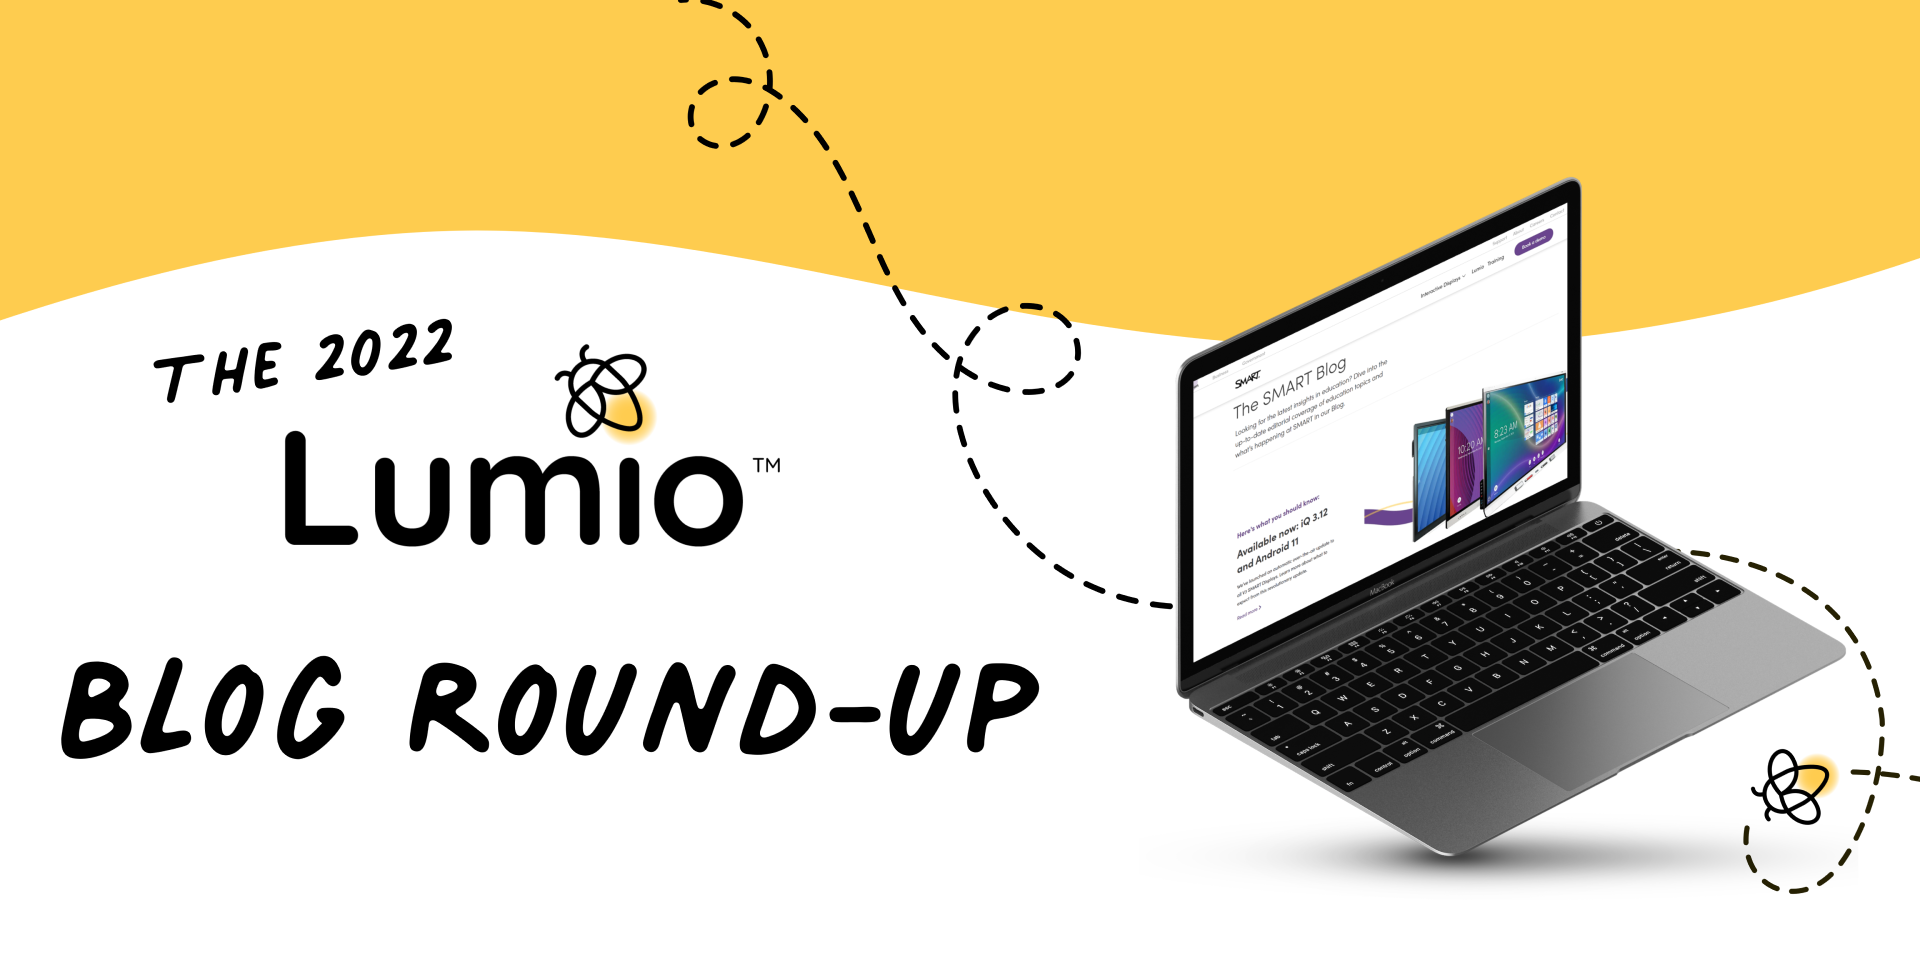 The SMART Blog preview on a laptop and text: The 2022 Lumio Blog Round-Up. 